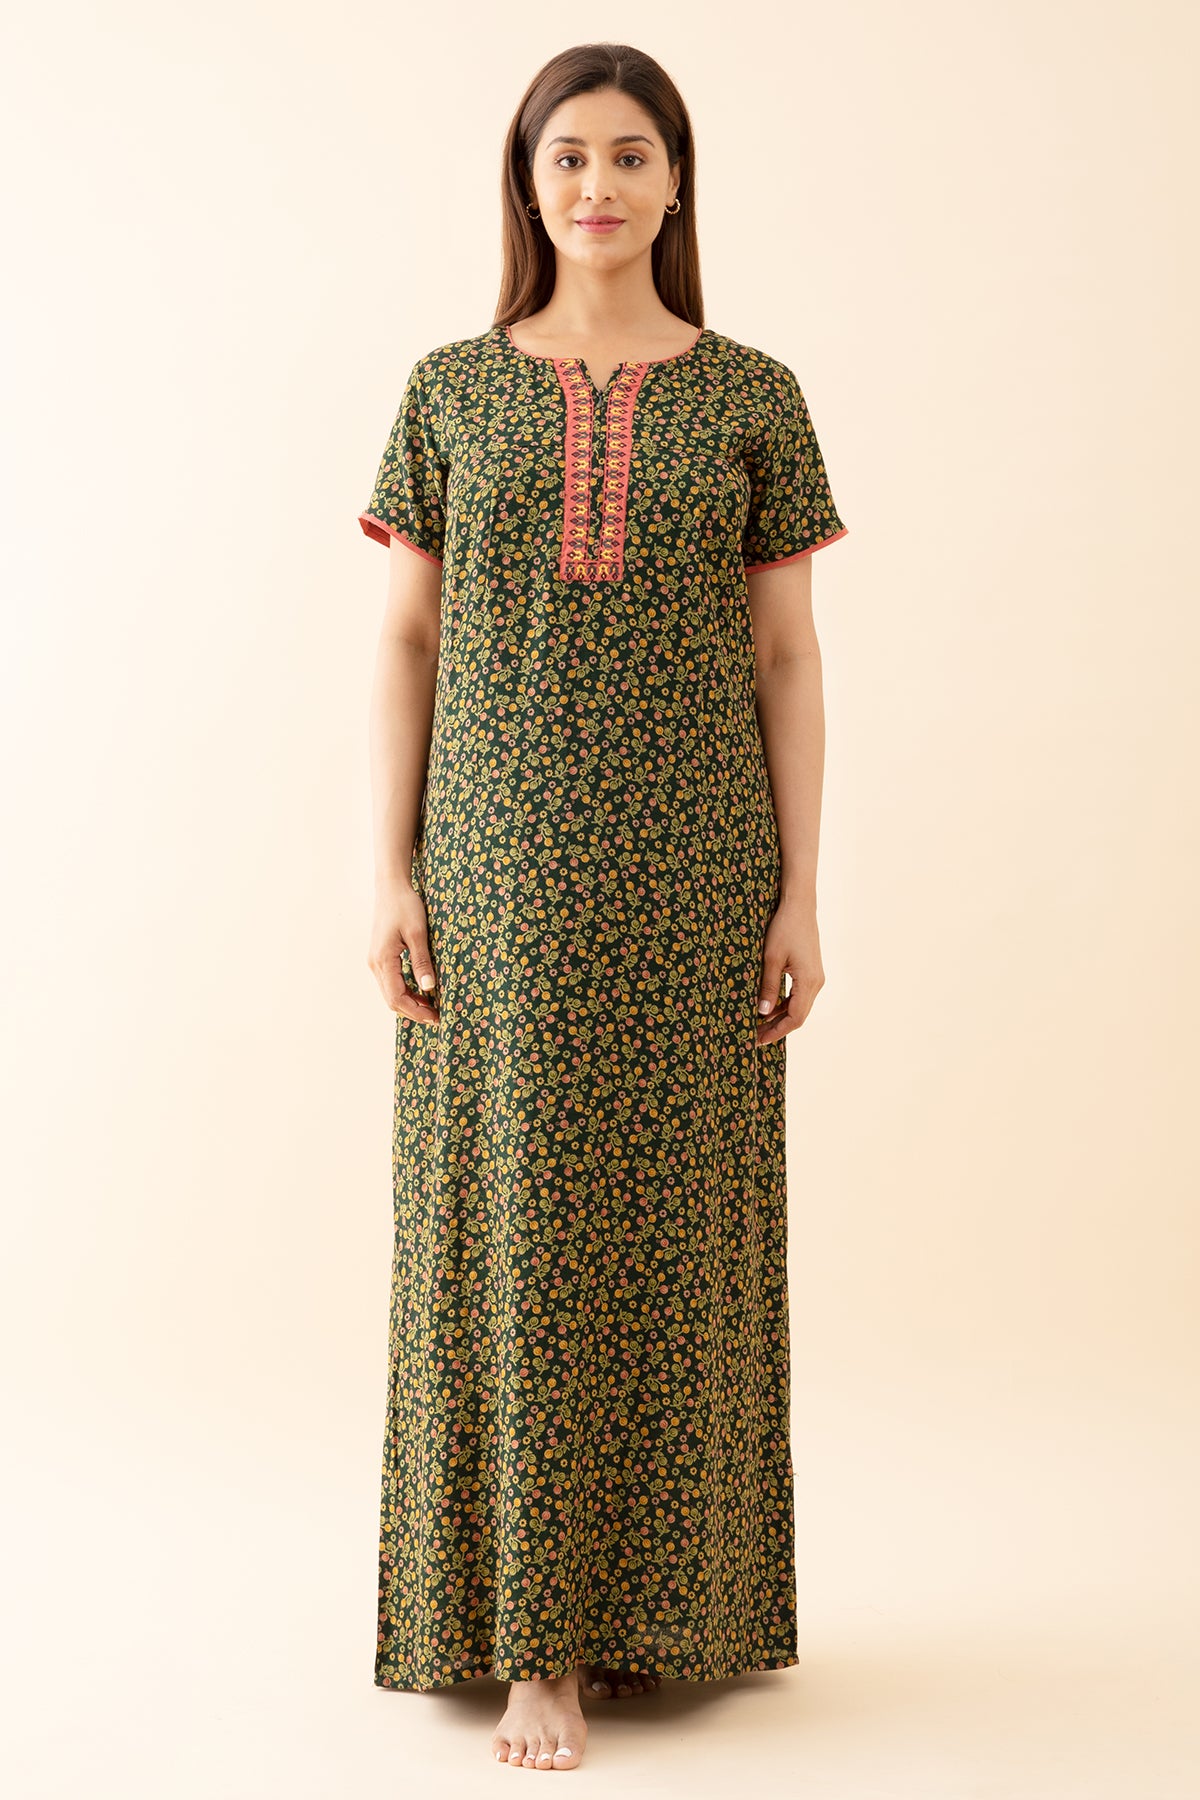 Tulip Floral Printed with Contrast Embroidered Yoke Green